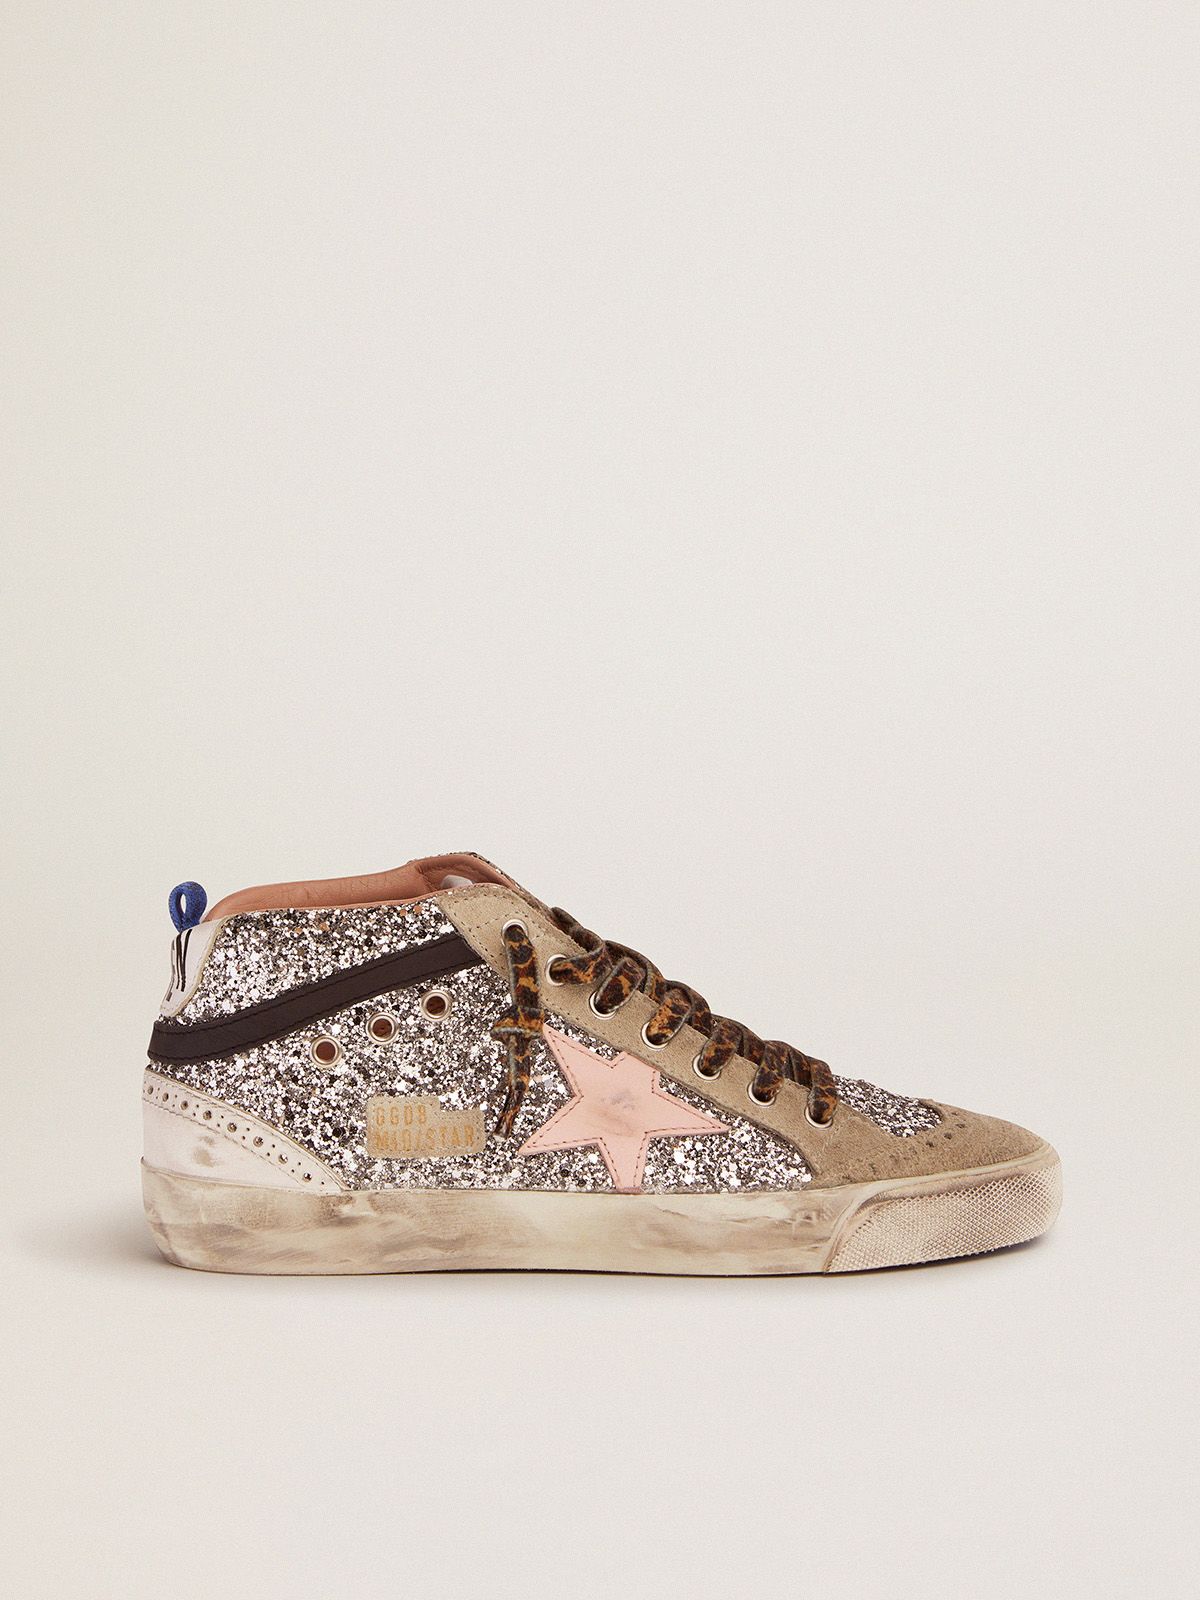 Mid Star sneakers with silver glitter upper and pale pink star